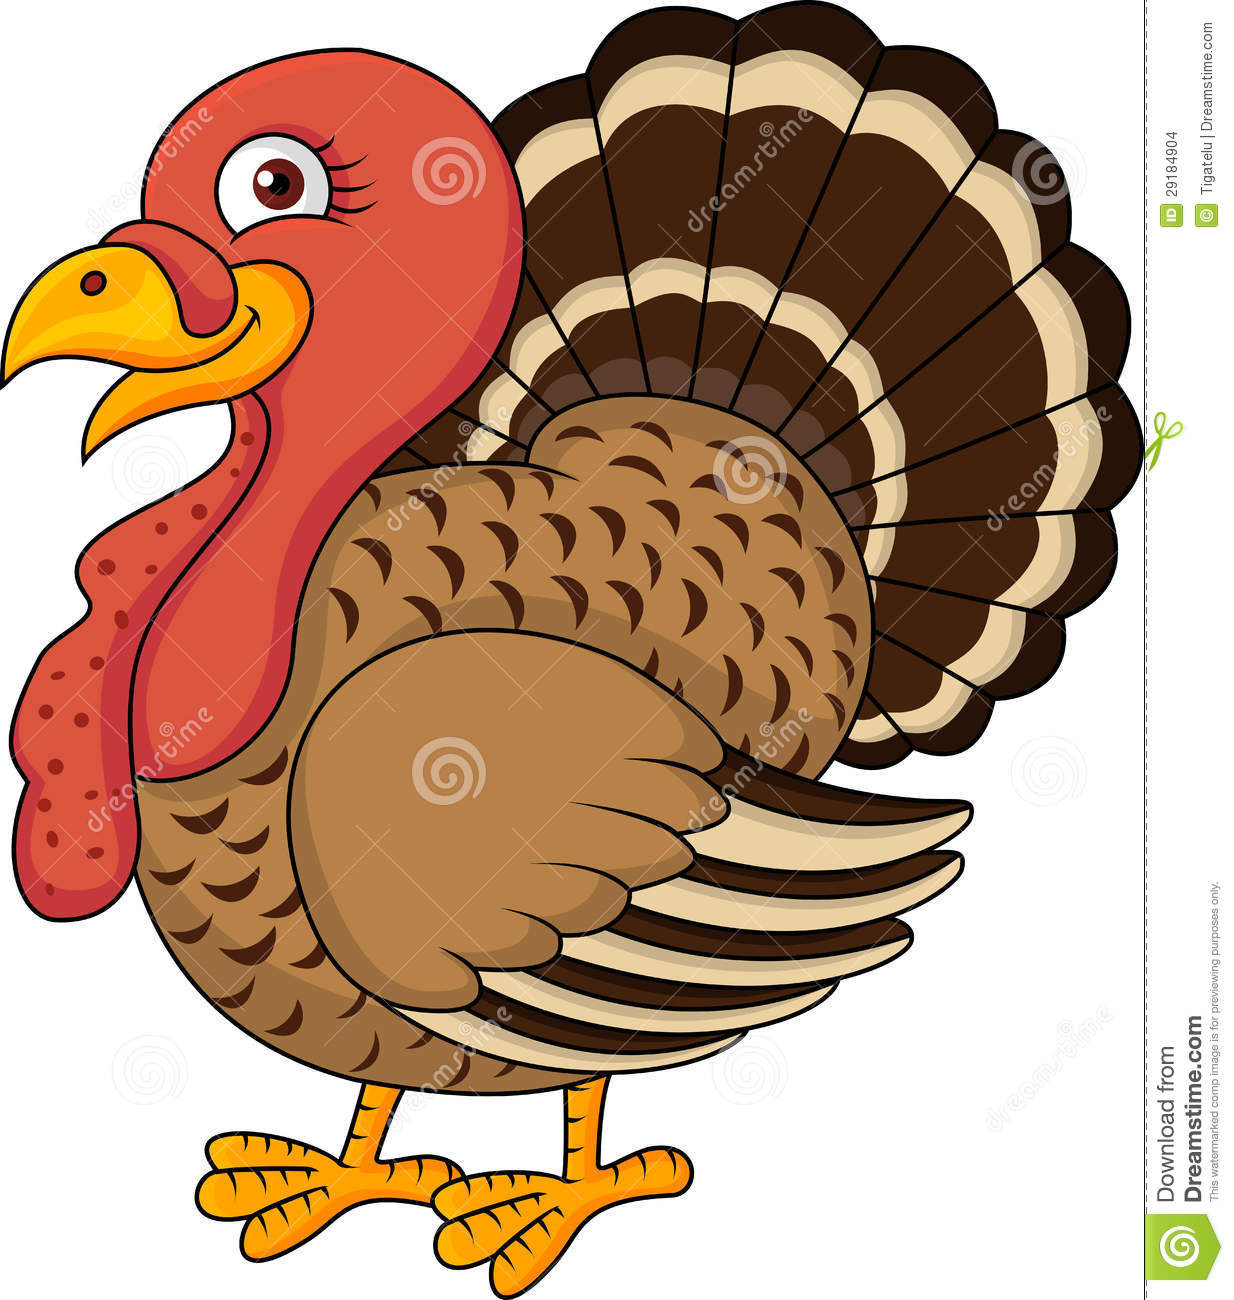 Thanksgiving Turkey Cartoon Images
 Turkey clipart ic Pencil and in color turkey clipart